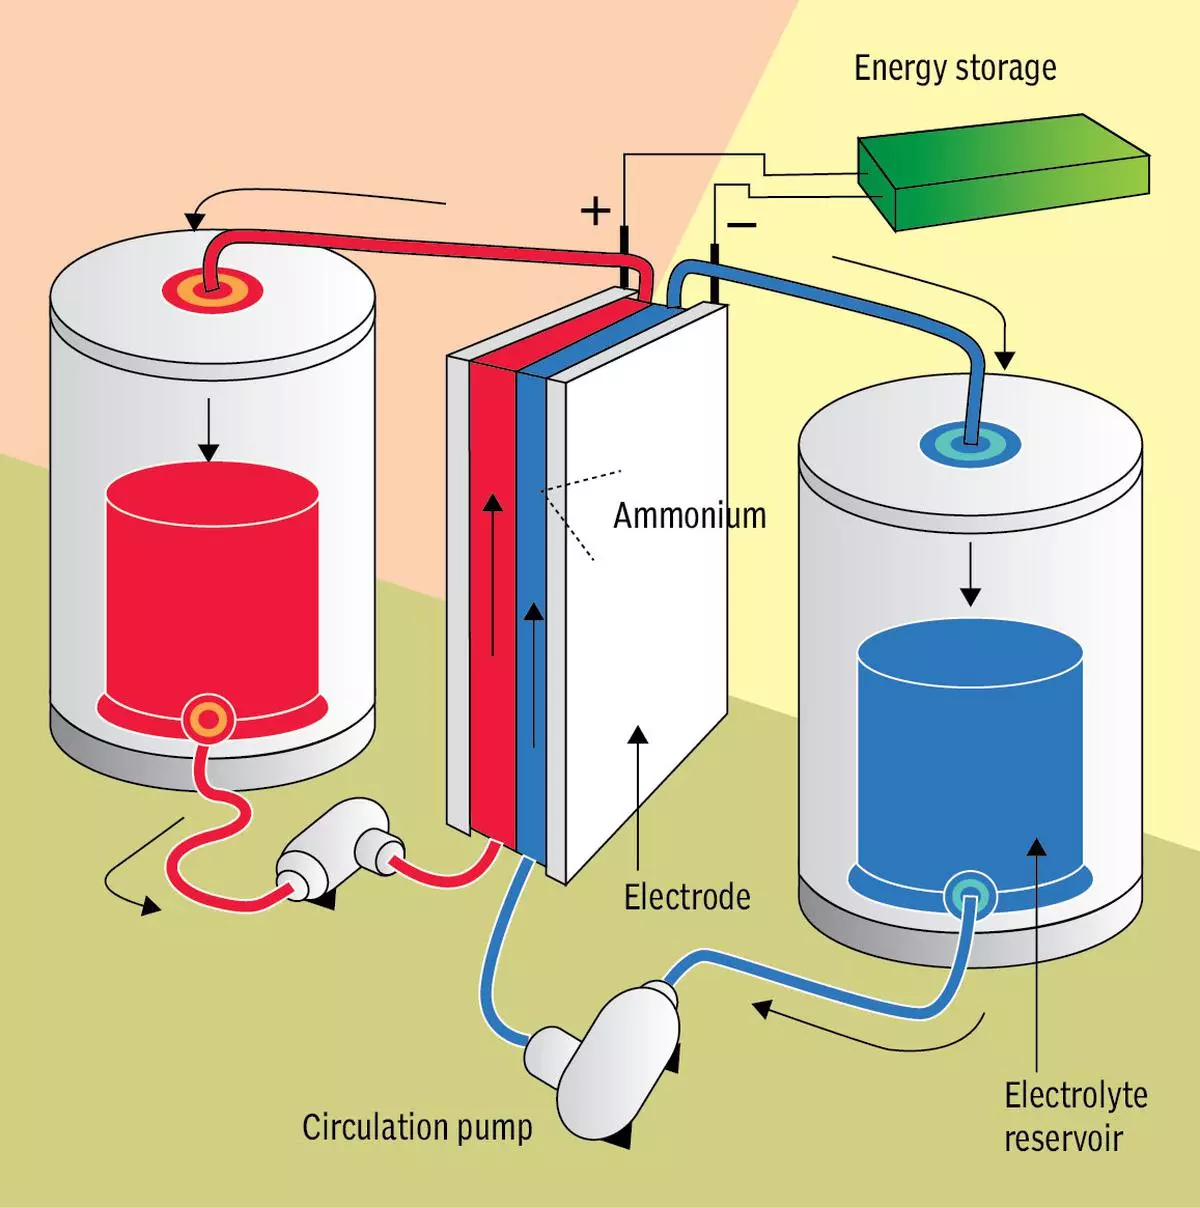 The basic architecture of a flow battery